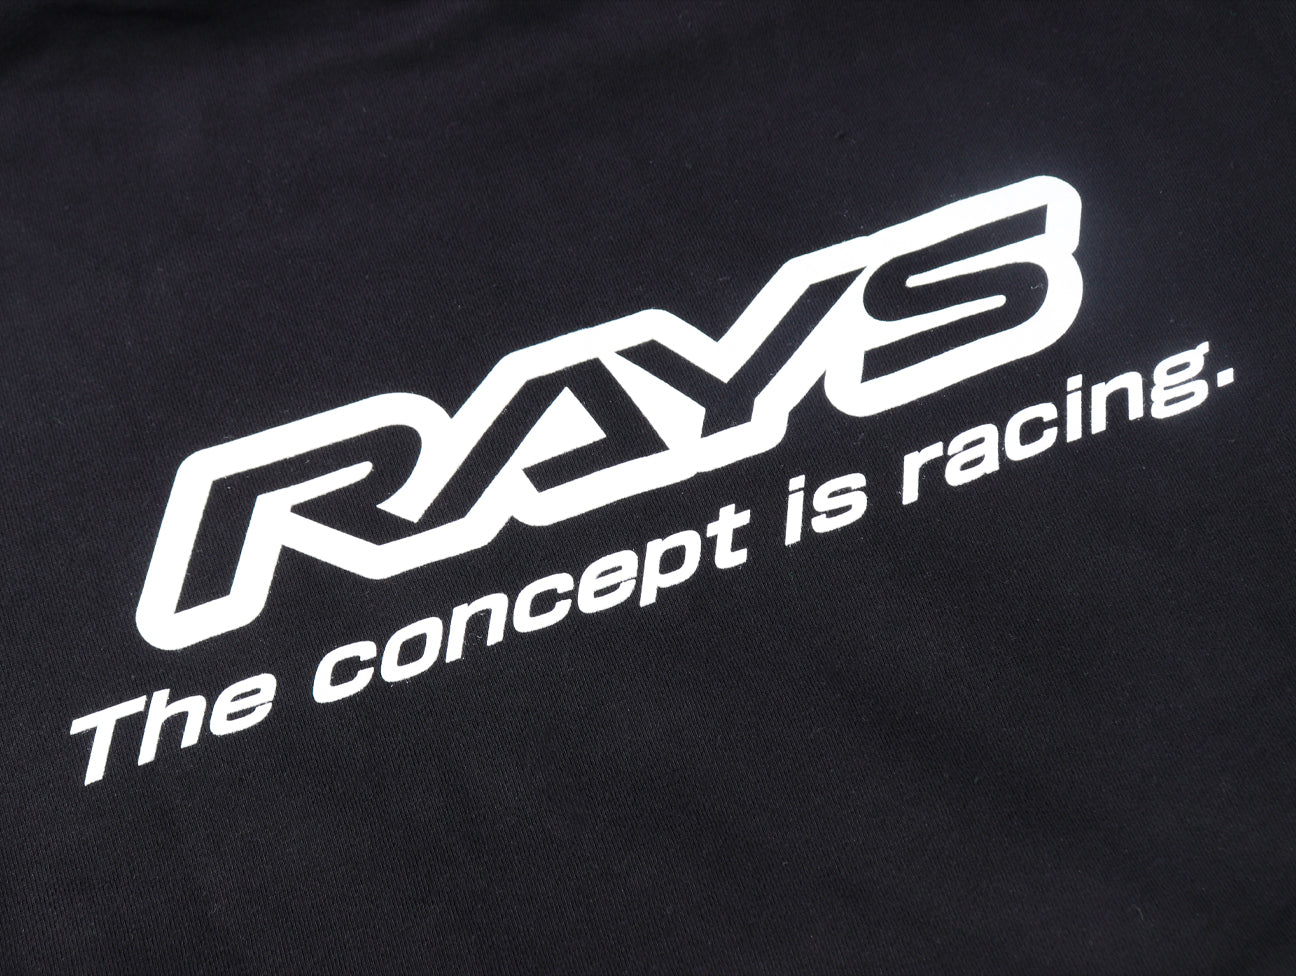 Rays "The Concept Is Racing" Pull Over Hoodie